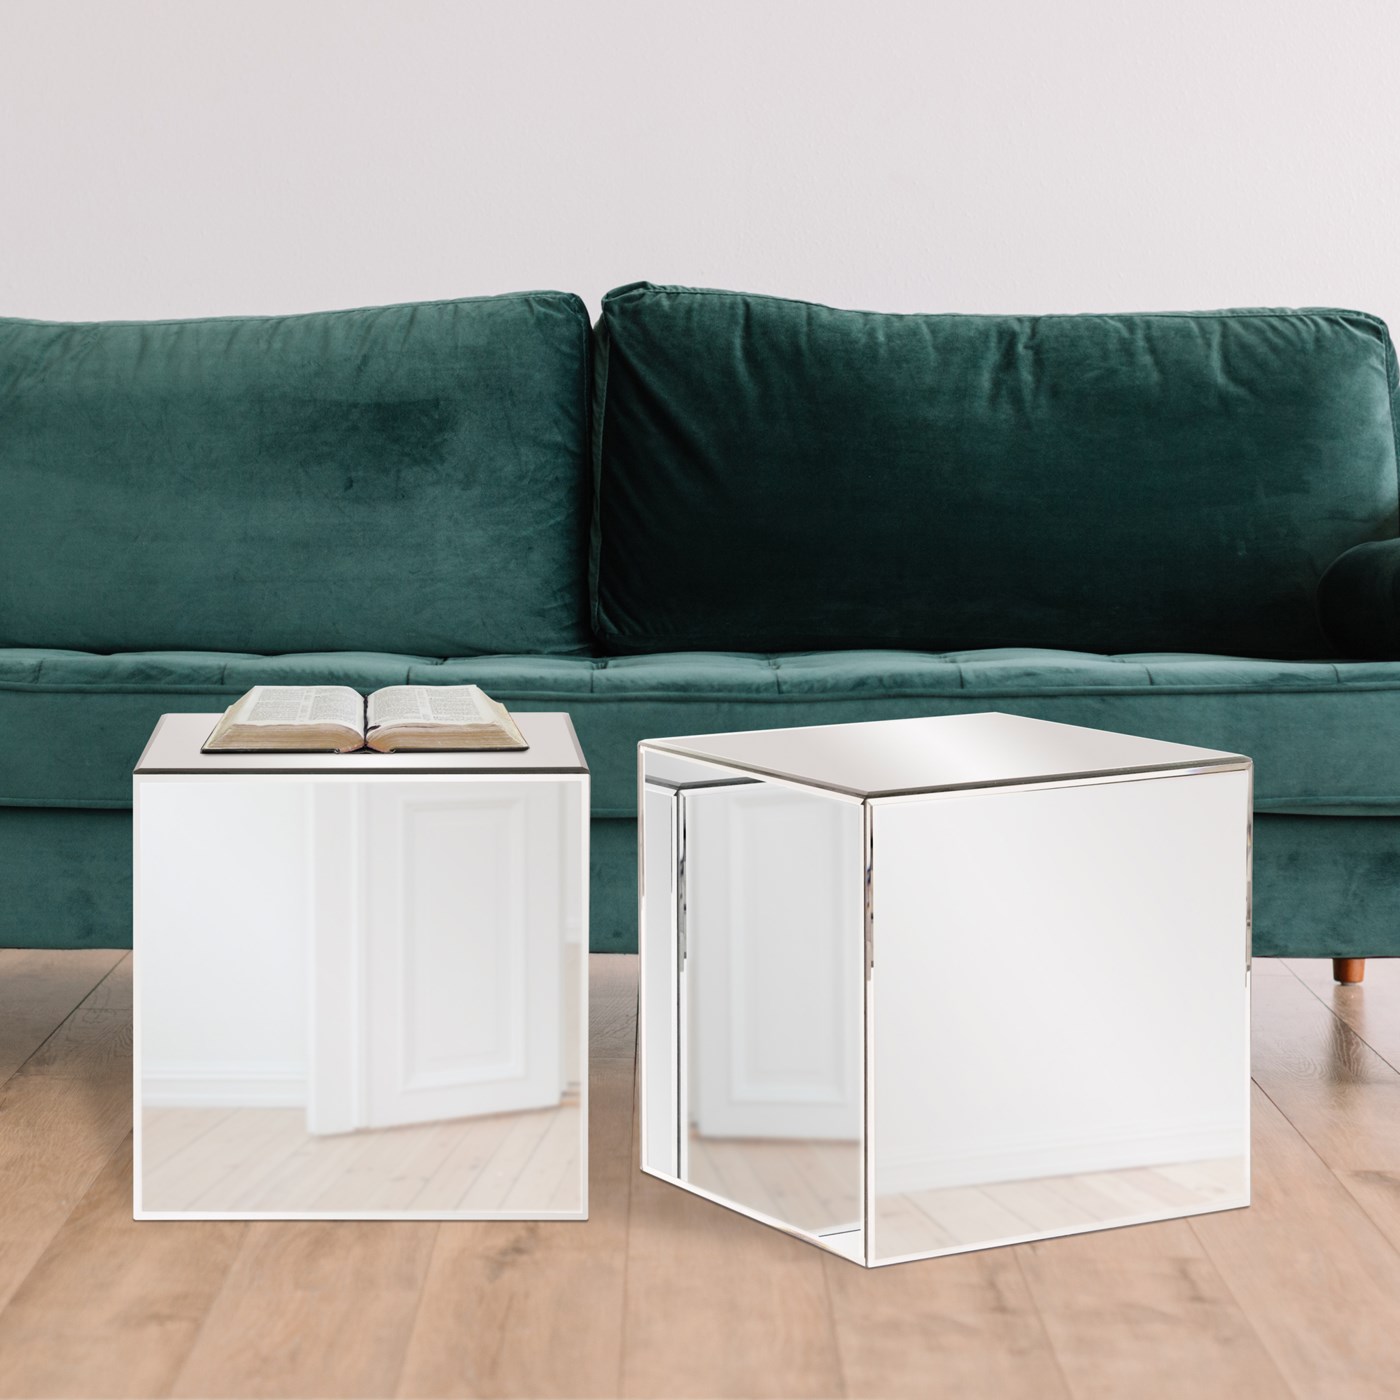 Mirrored Cube Table Side Tables The, Mirrored Cube End Table